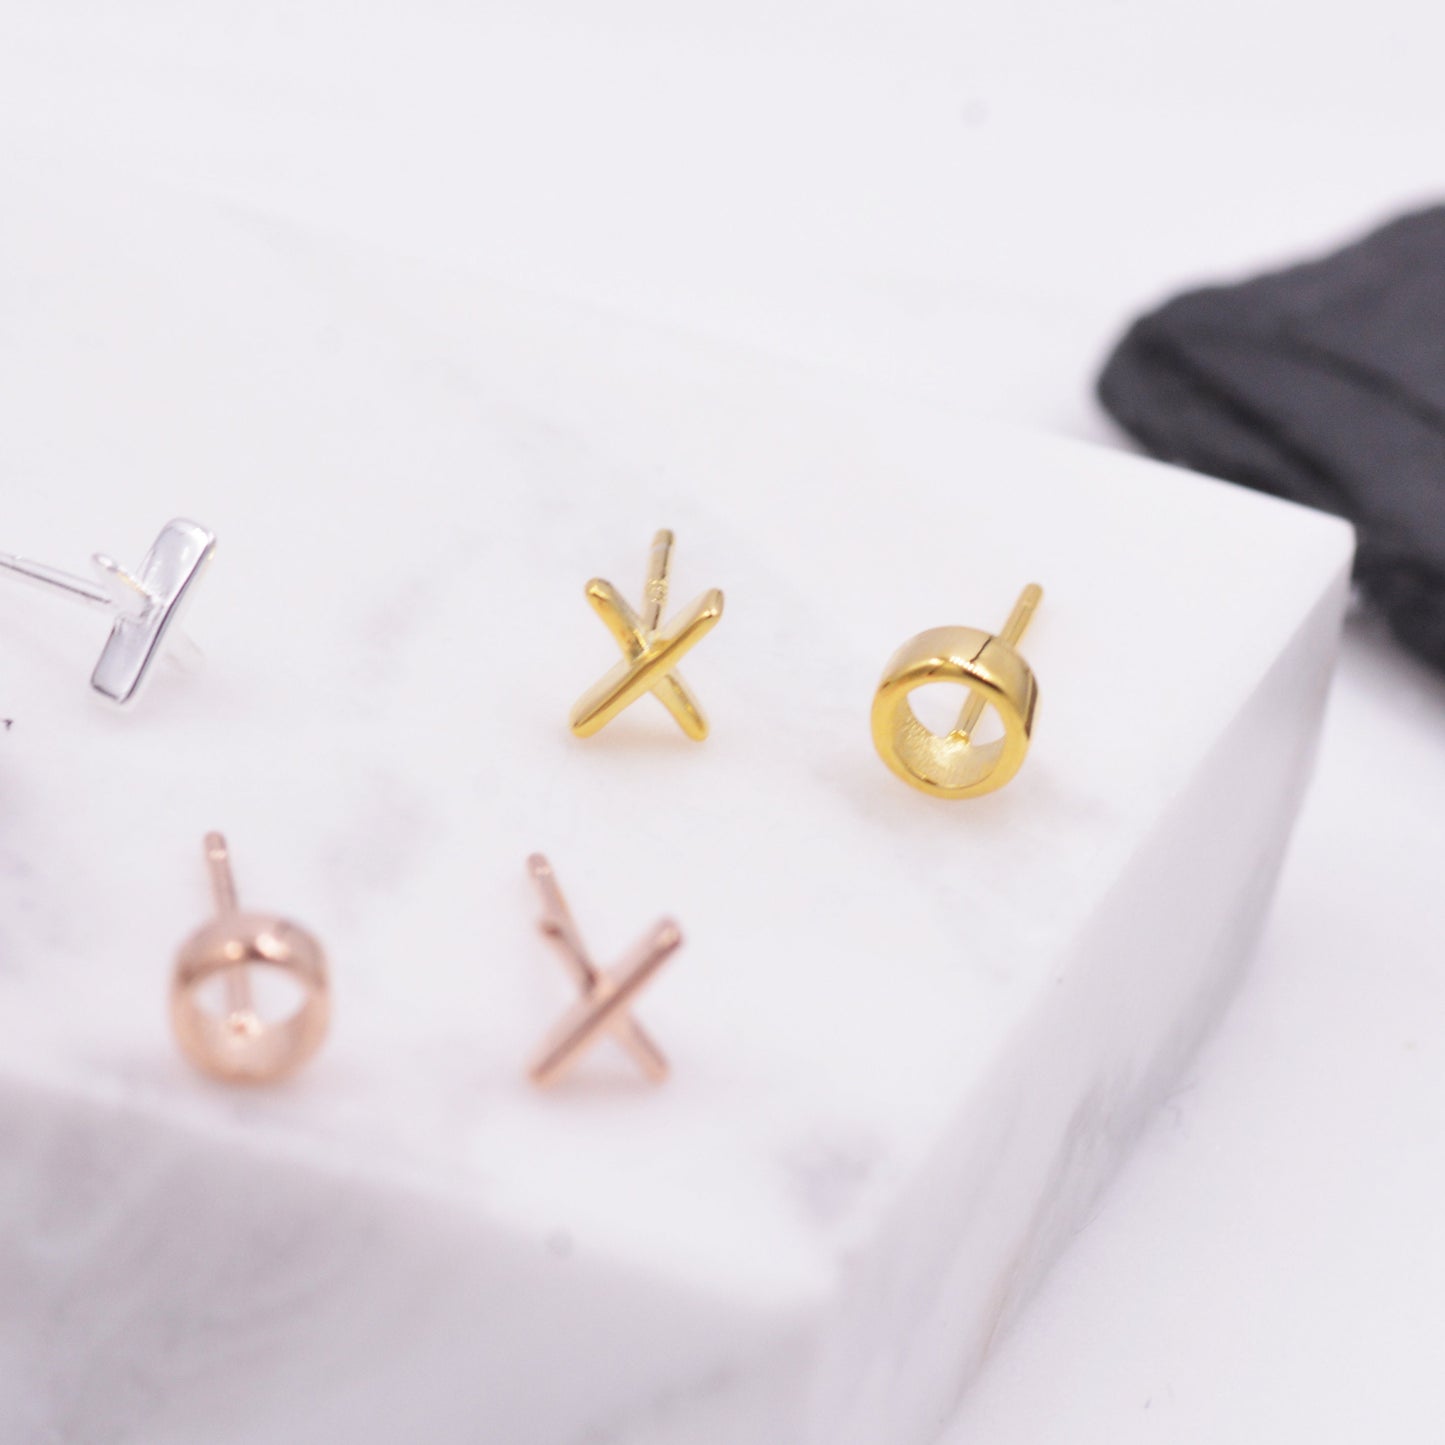 Sterling Silver xoxo Kiss and Hugs Tiny Stud Earrings, Silver, Gold and Rose Gold, Cute and Fun Jewellery